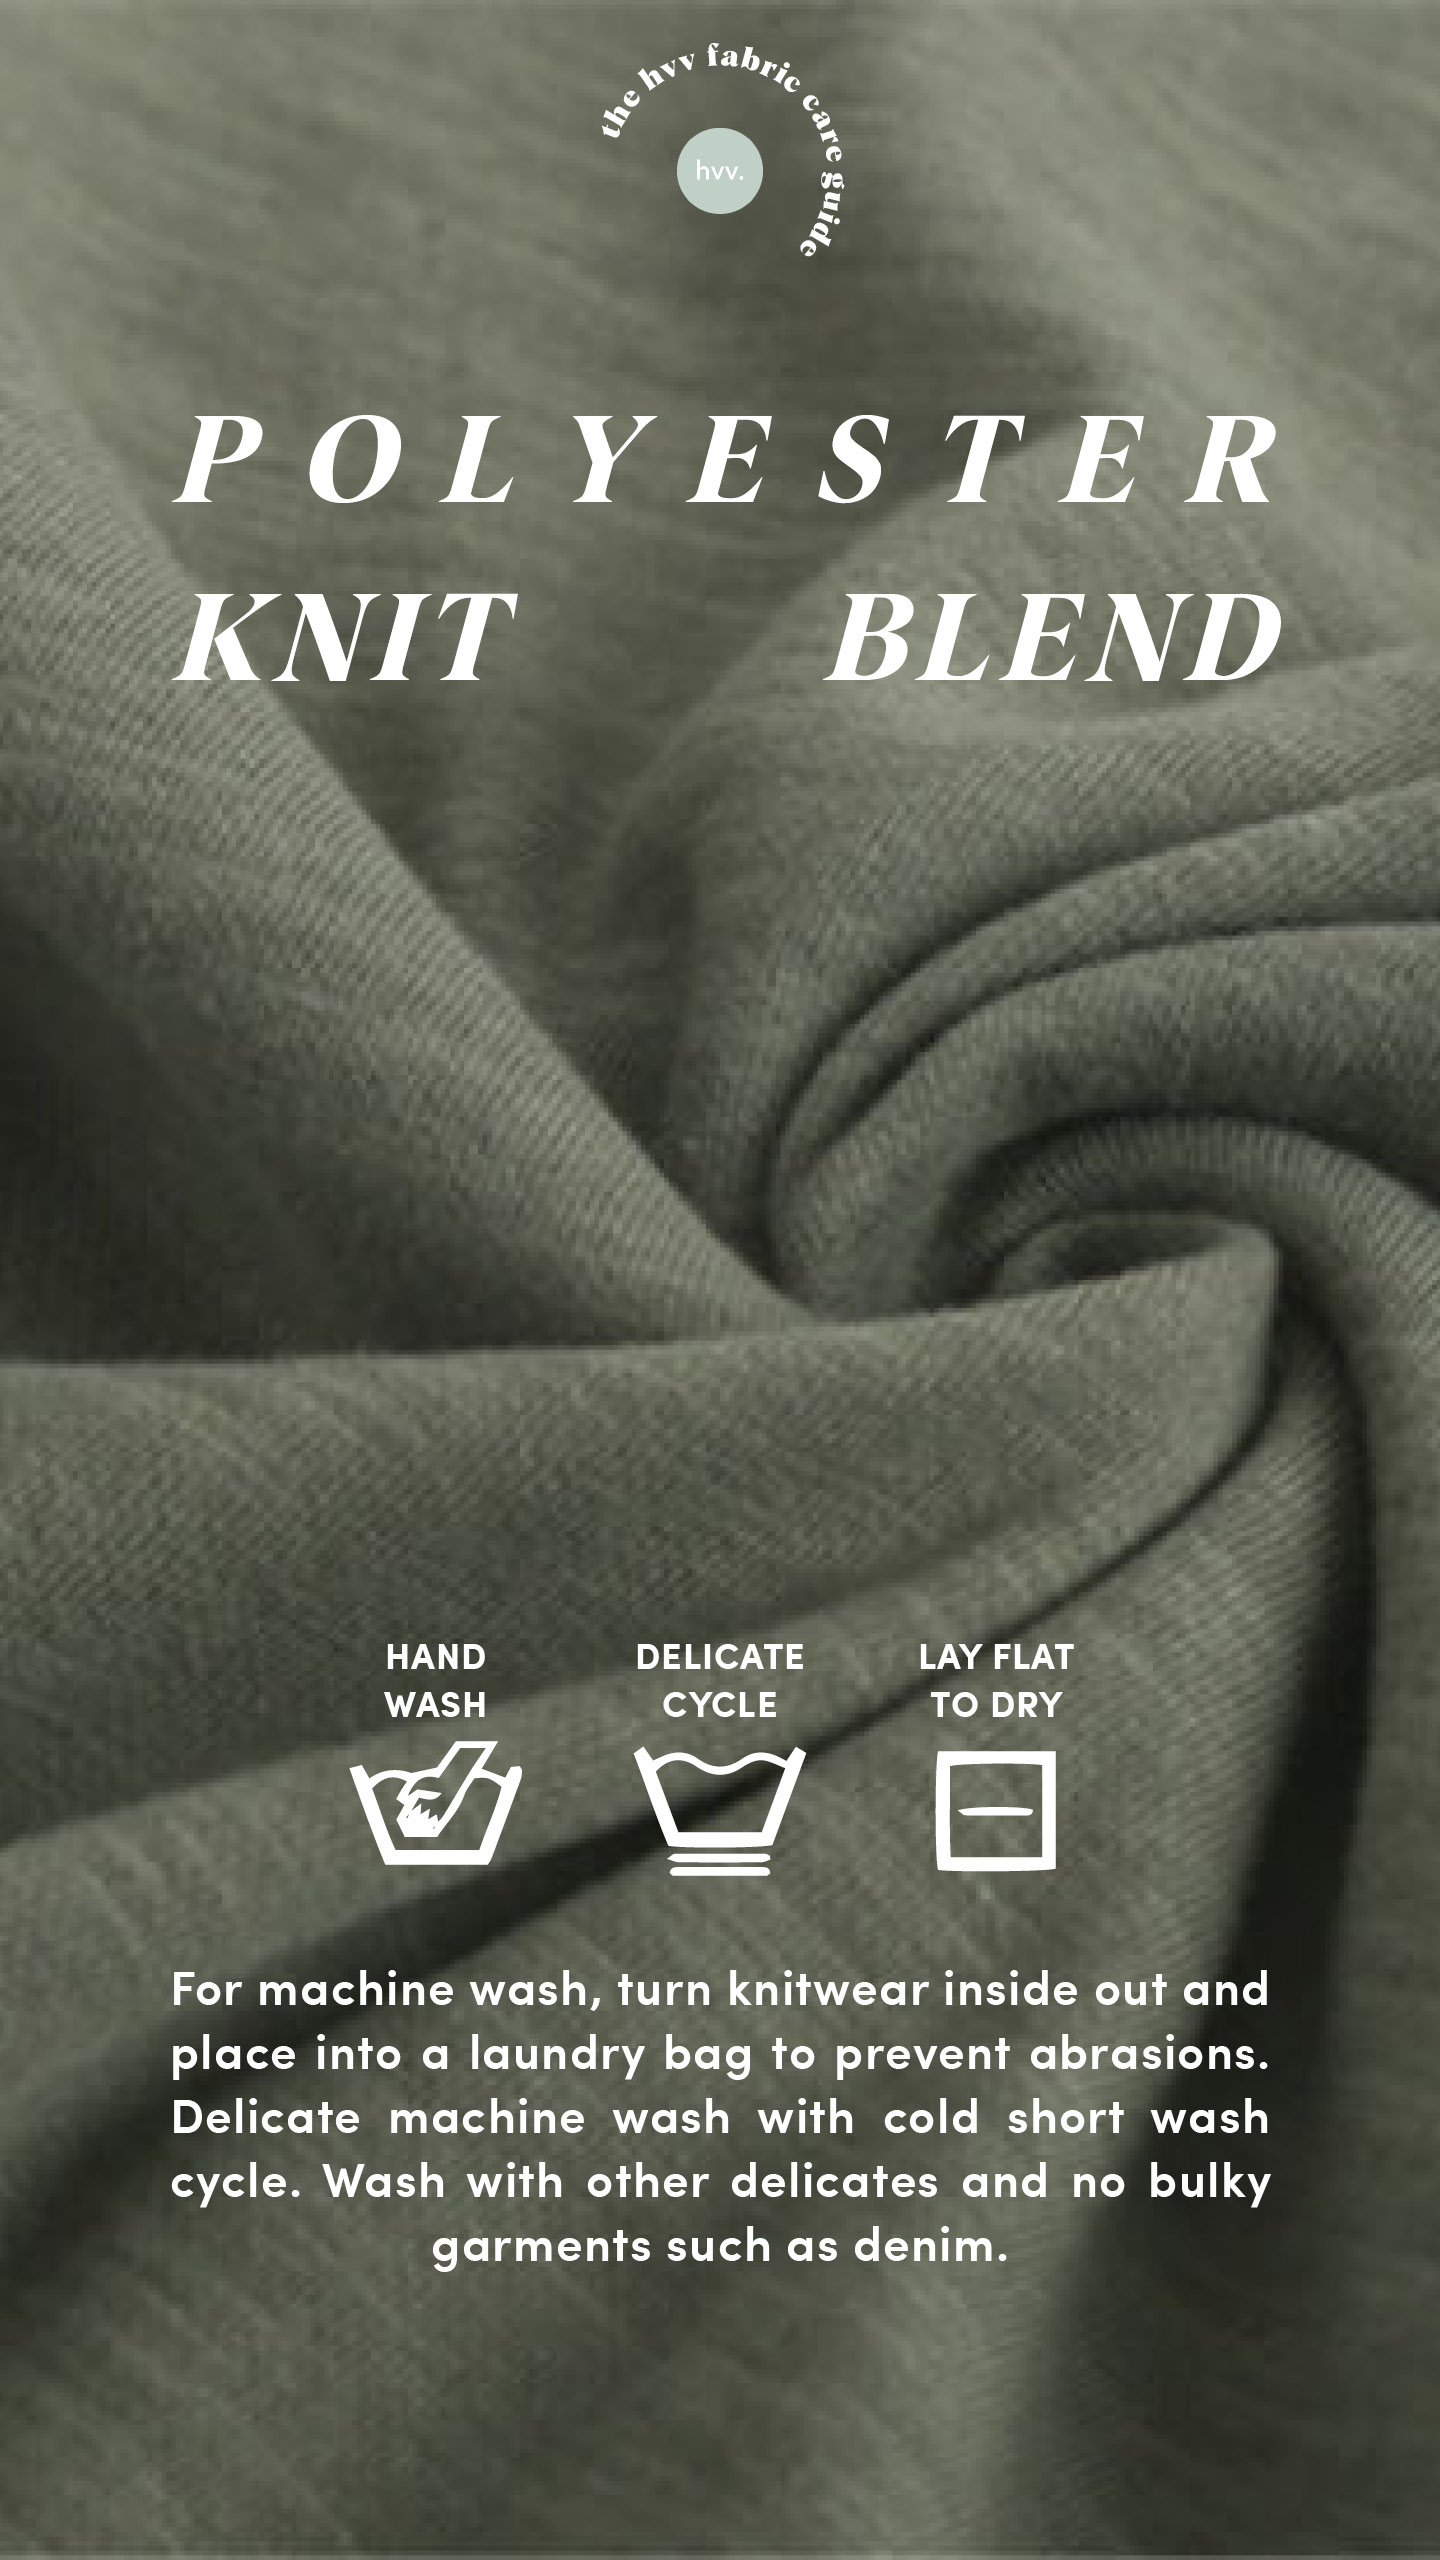 Polyester Knit Blend Fabric Care